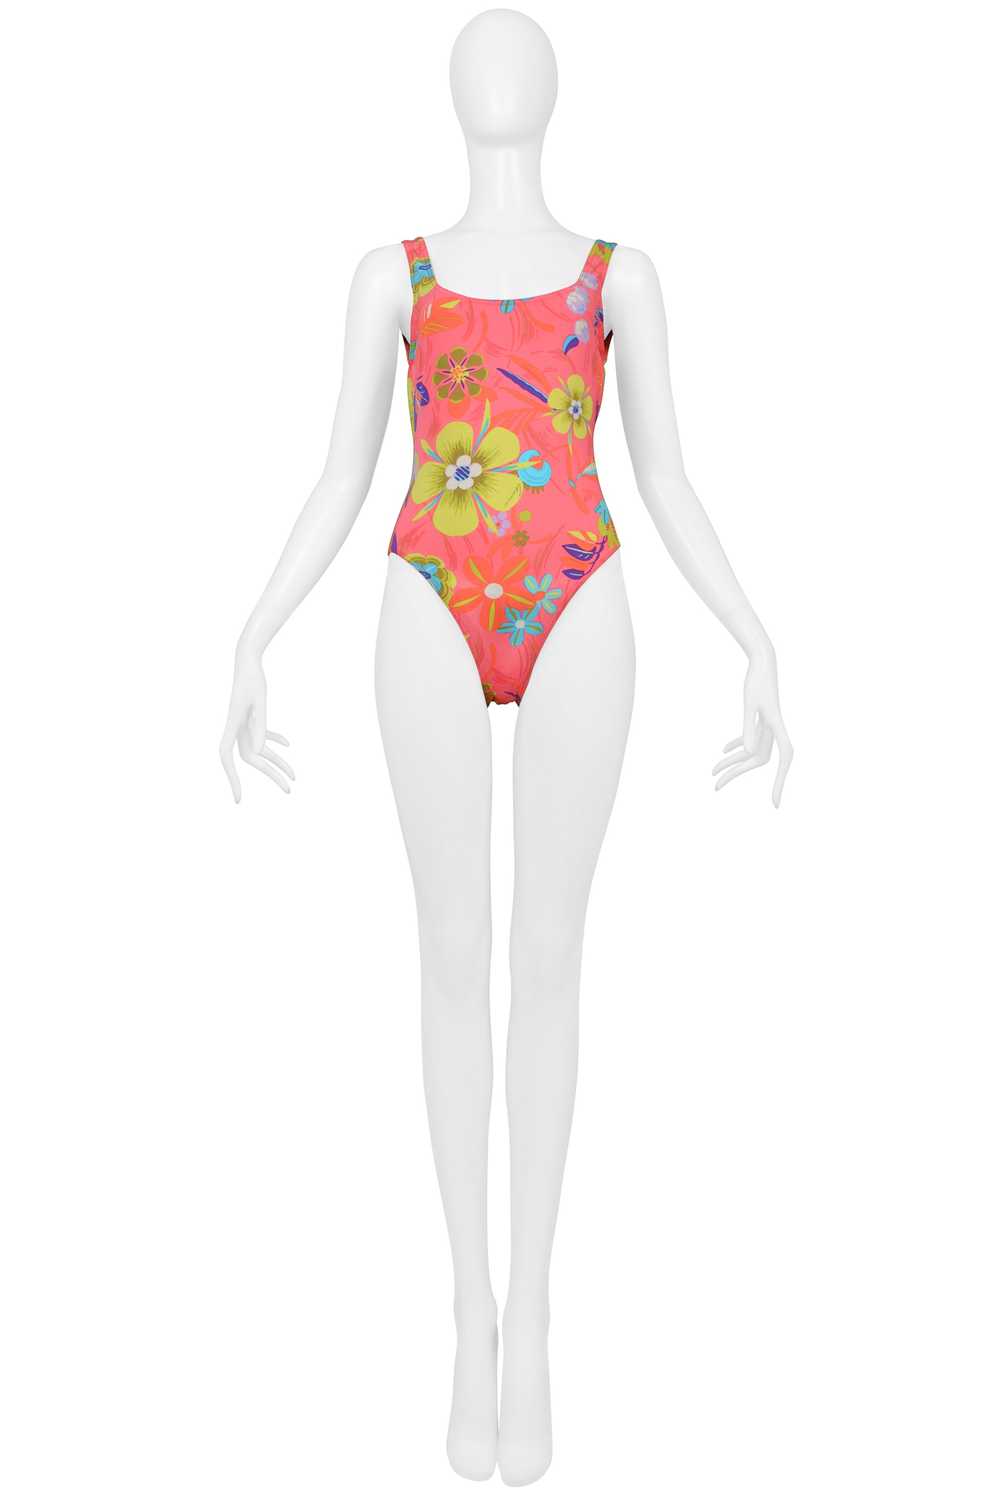 GUCCI BY TOM FORD PINK FLORAL PRINT ONE PIECE SWI… - image 3